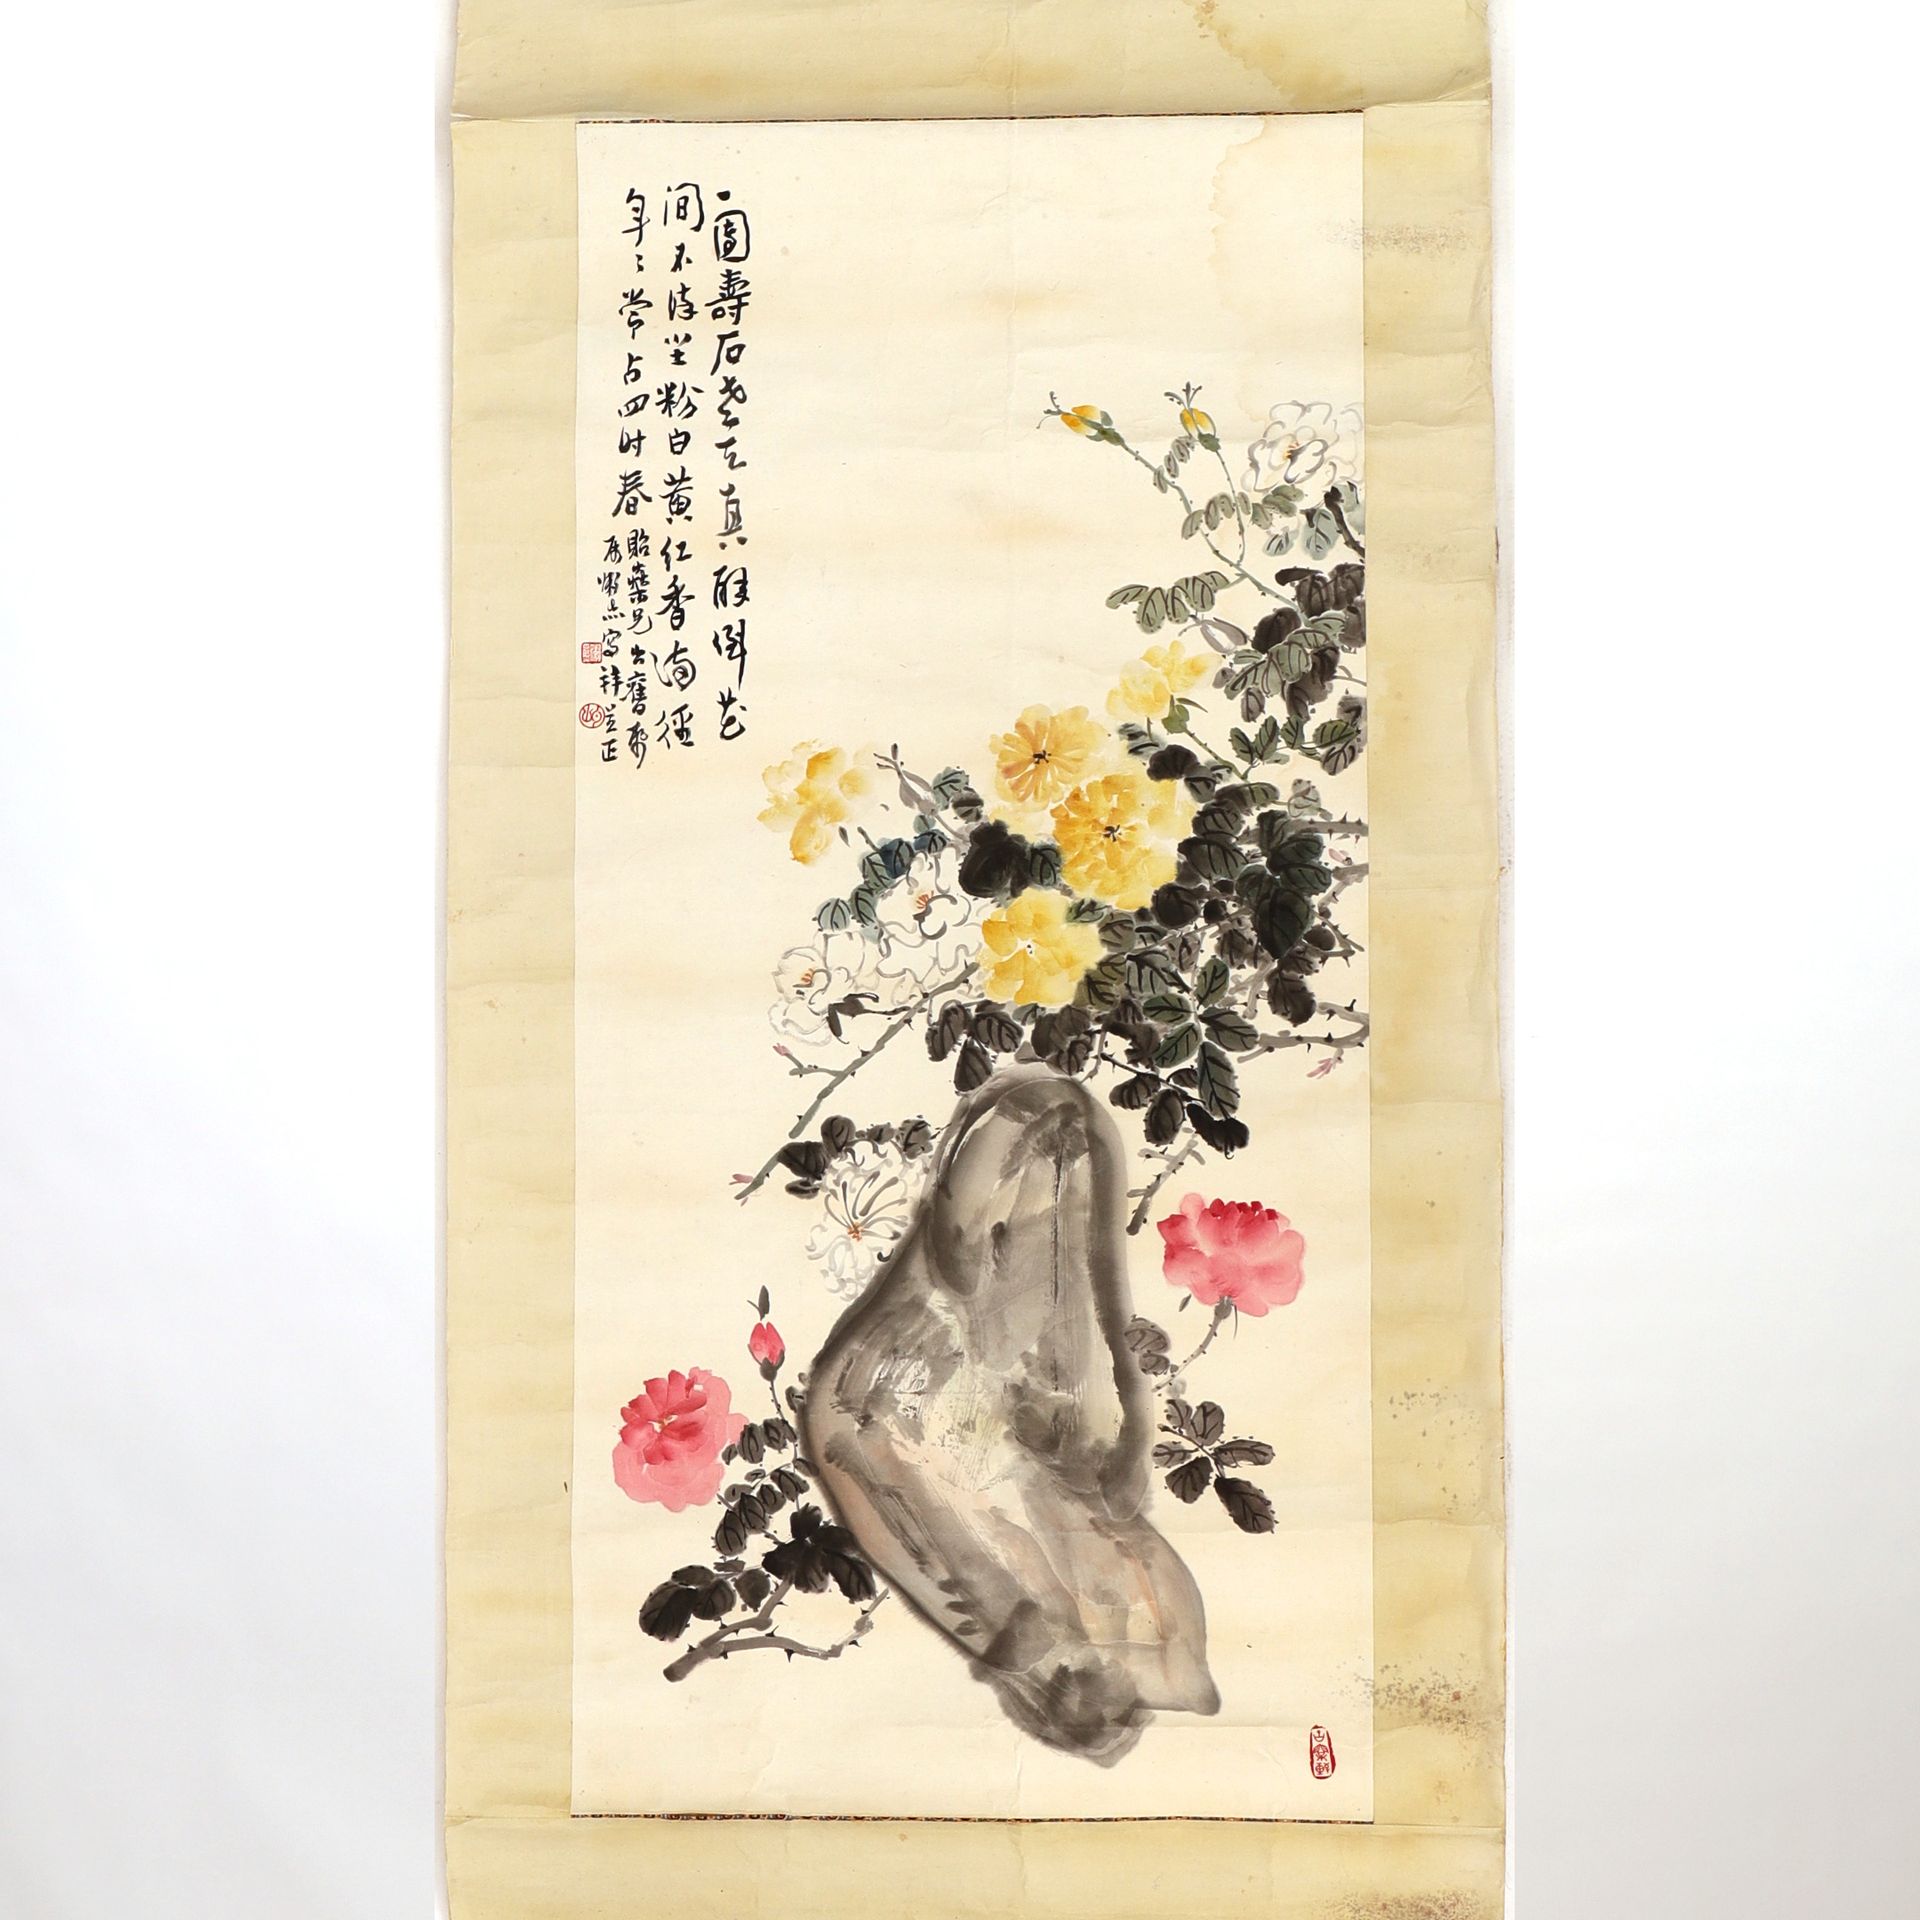 Null INK AND COLOR SCROLL PAINTING ON PAPER

Decorated with various flowers and &hellip;